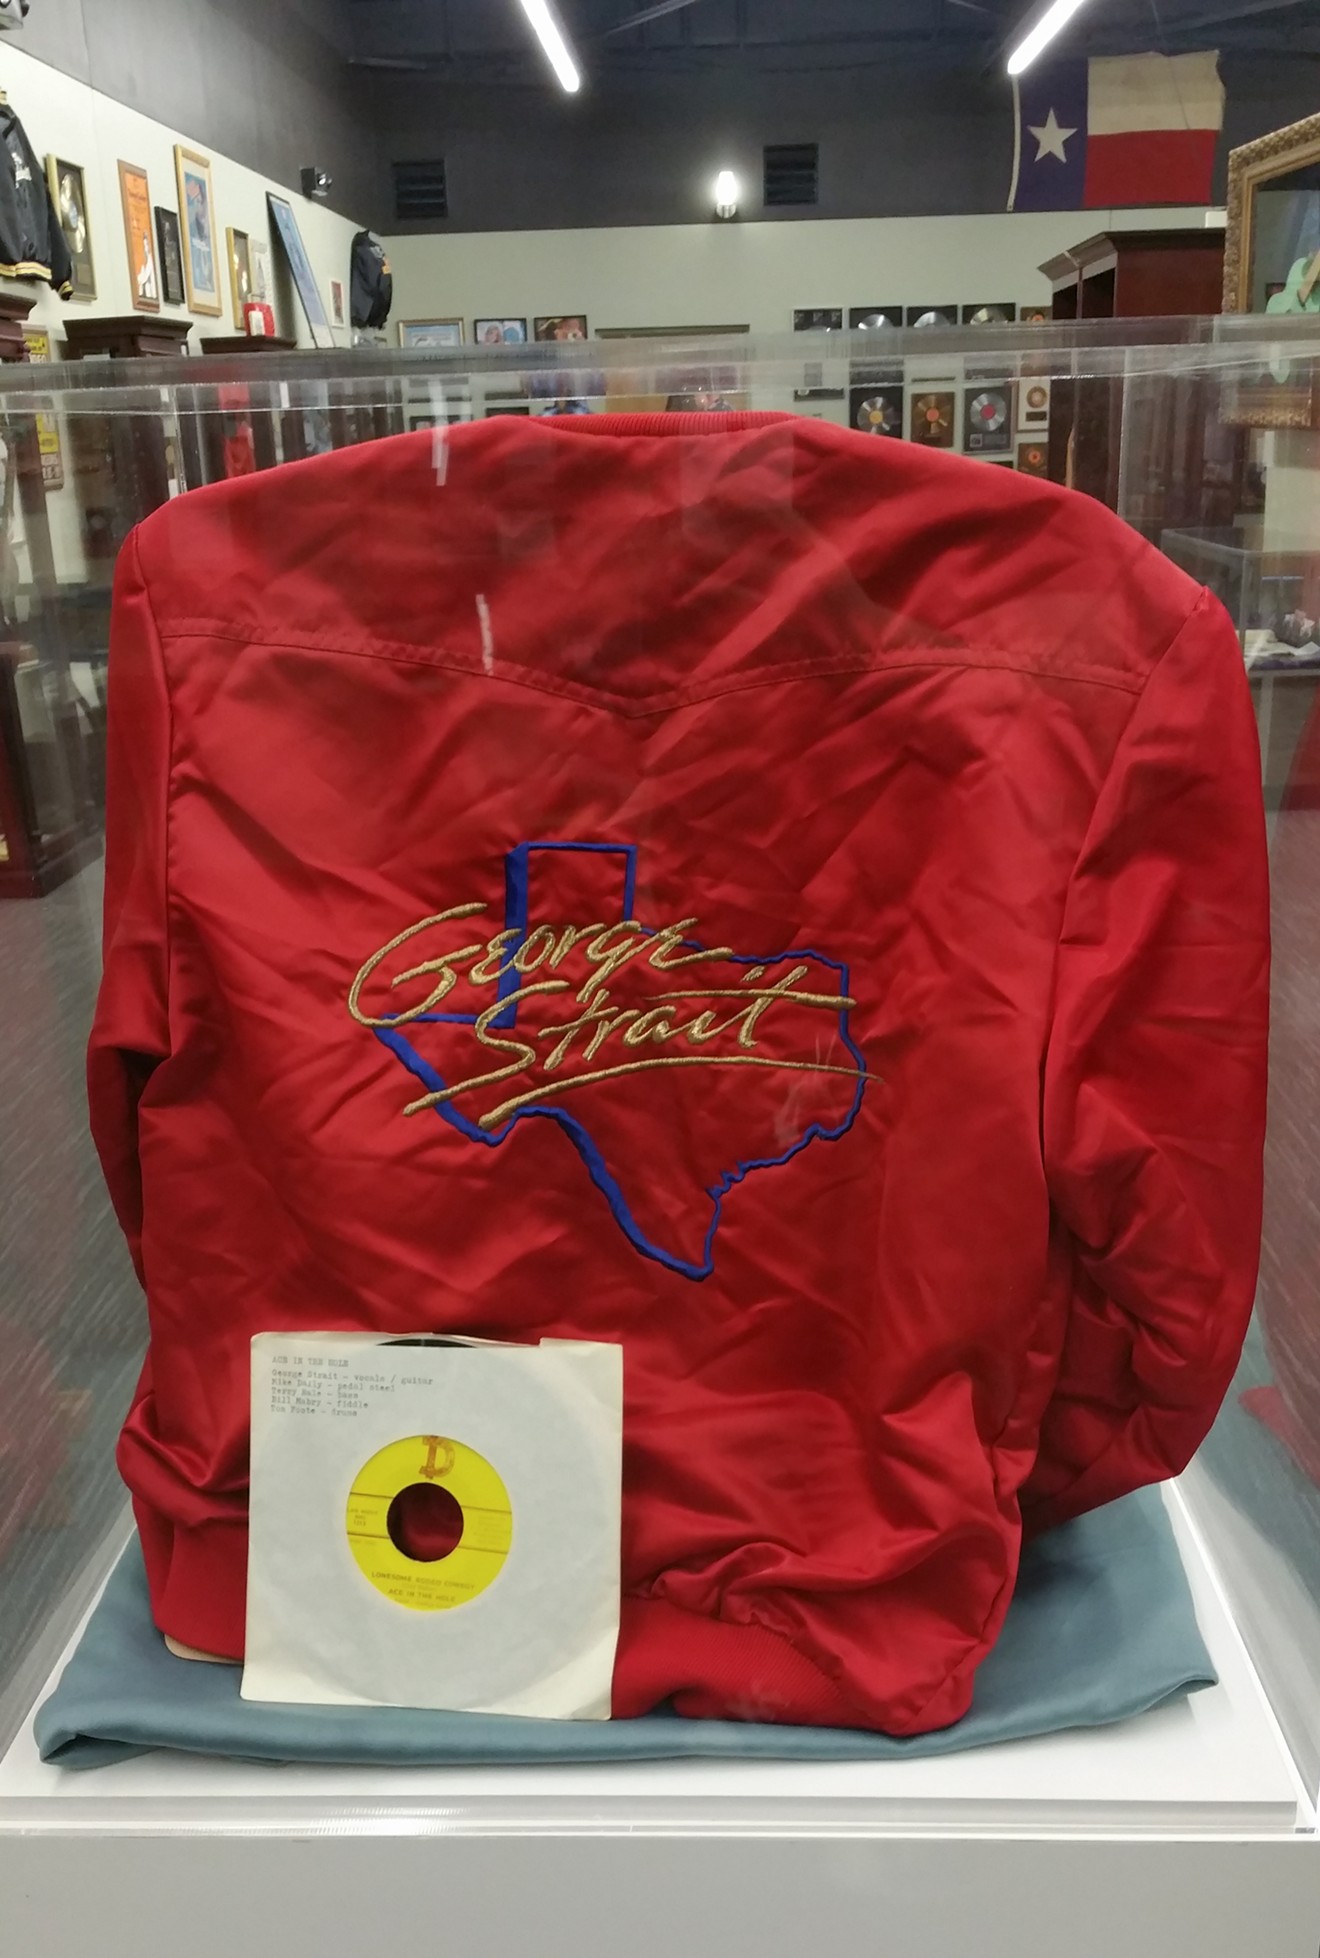 A George Strait jacket at Thomas Kreason's museum in Irving.